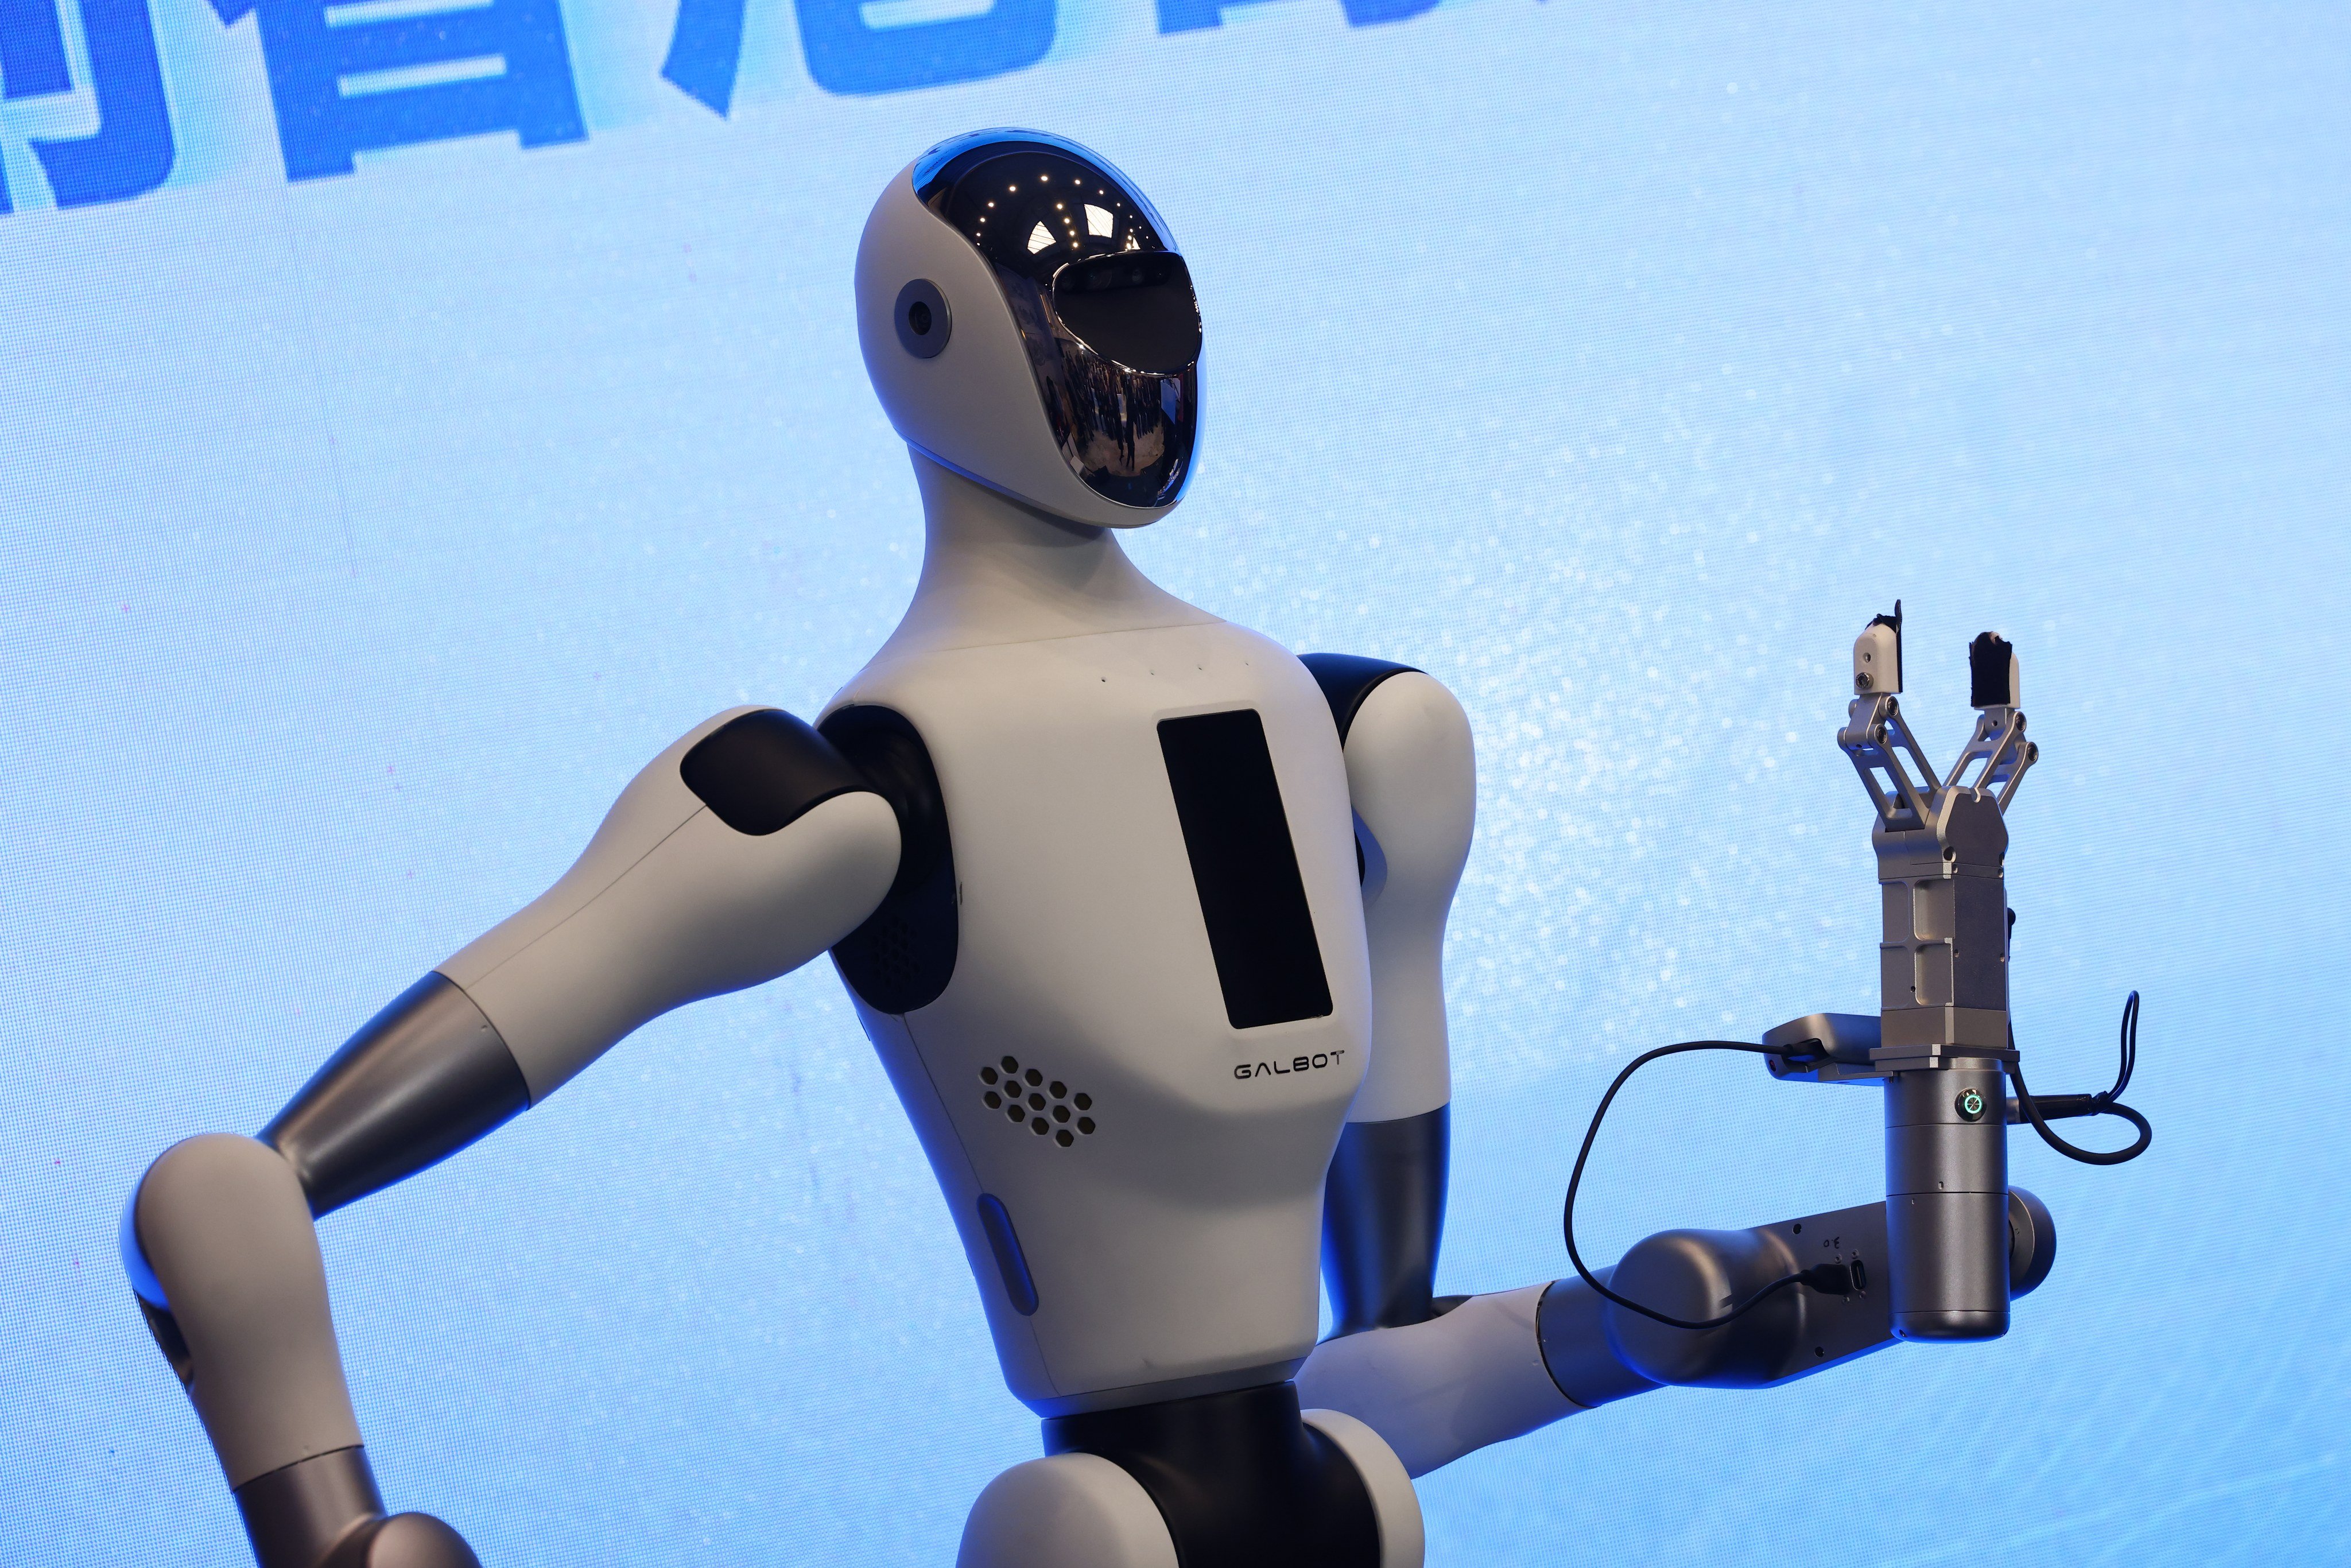 Beijing-based start-up Galbot demonstrates its humanoid robot at a signing ceremony for a new partnership with Hong Kong Investment Corporation on July 19, 2024. Photo: Dickson Lee